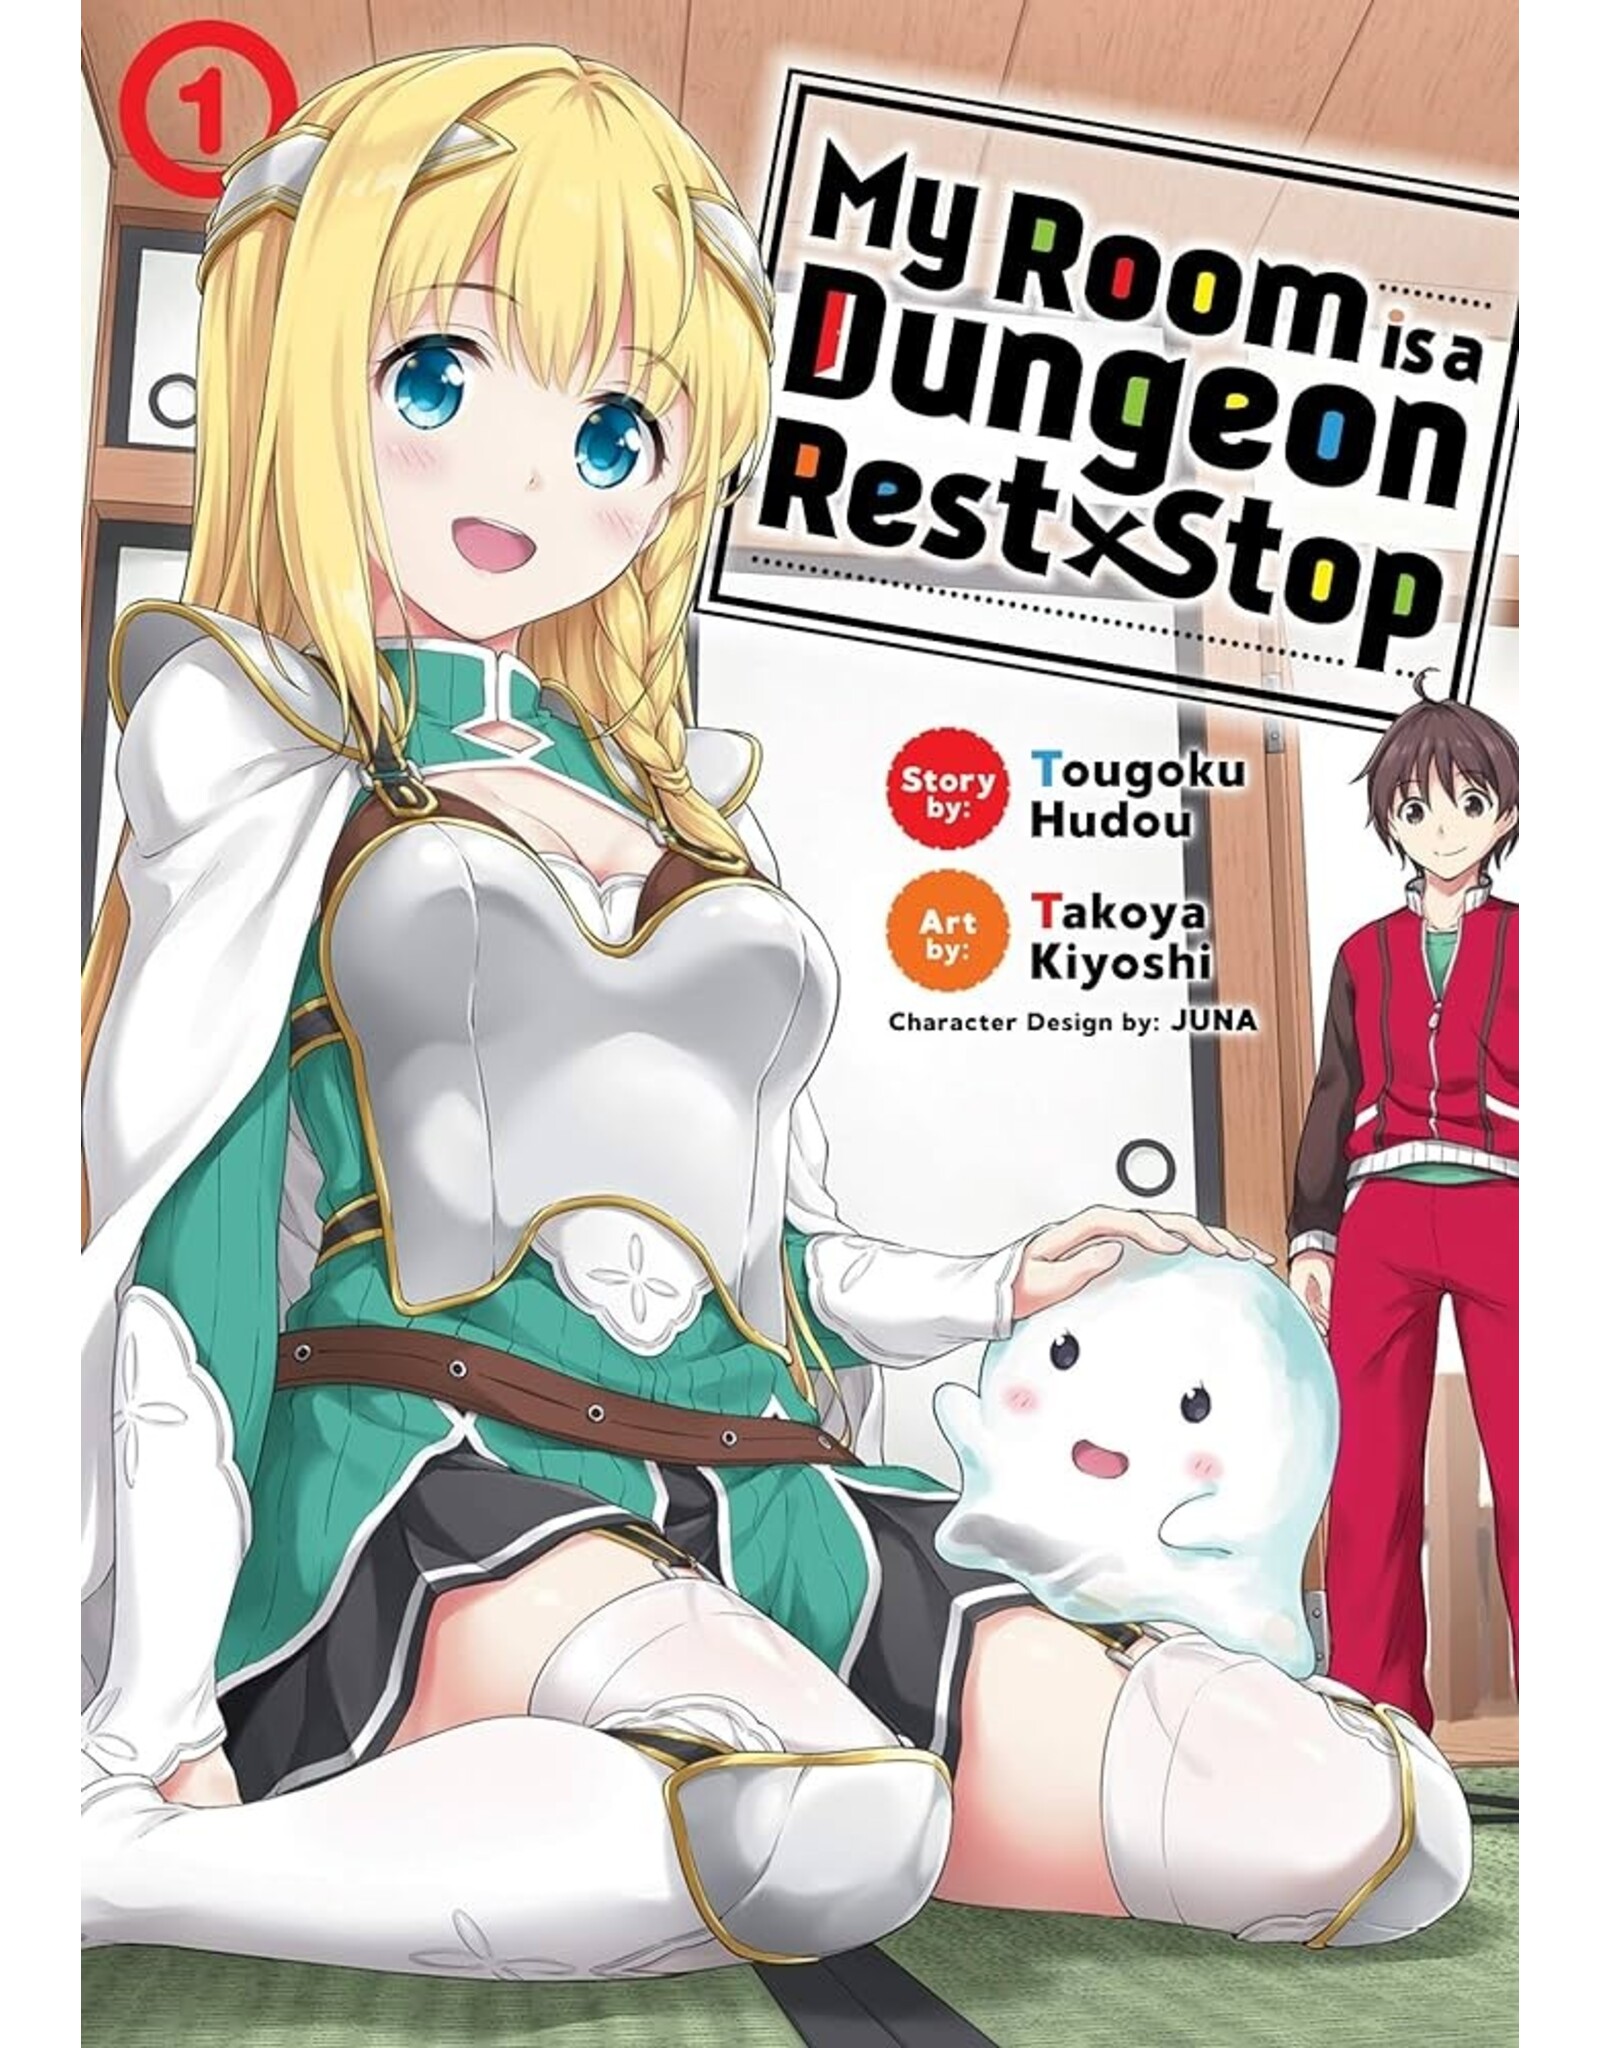 Room is a Dungeon Rest vol. 1-3 Manga Bundle (used)